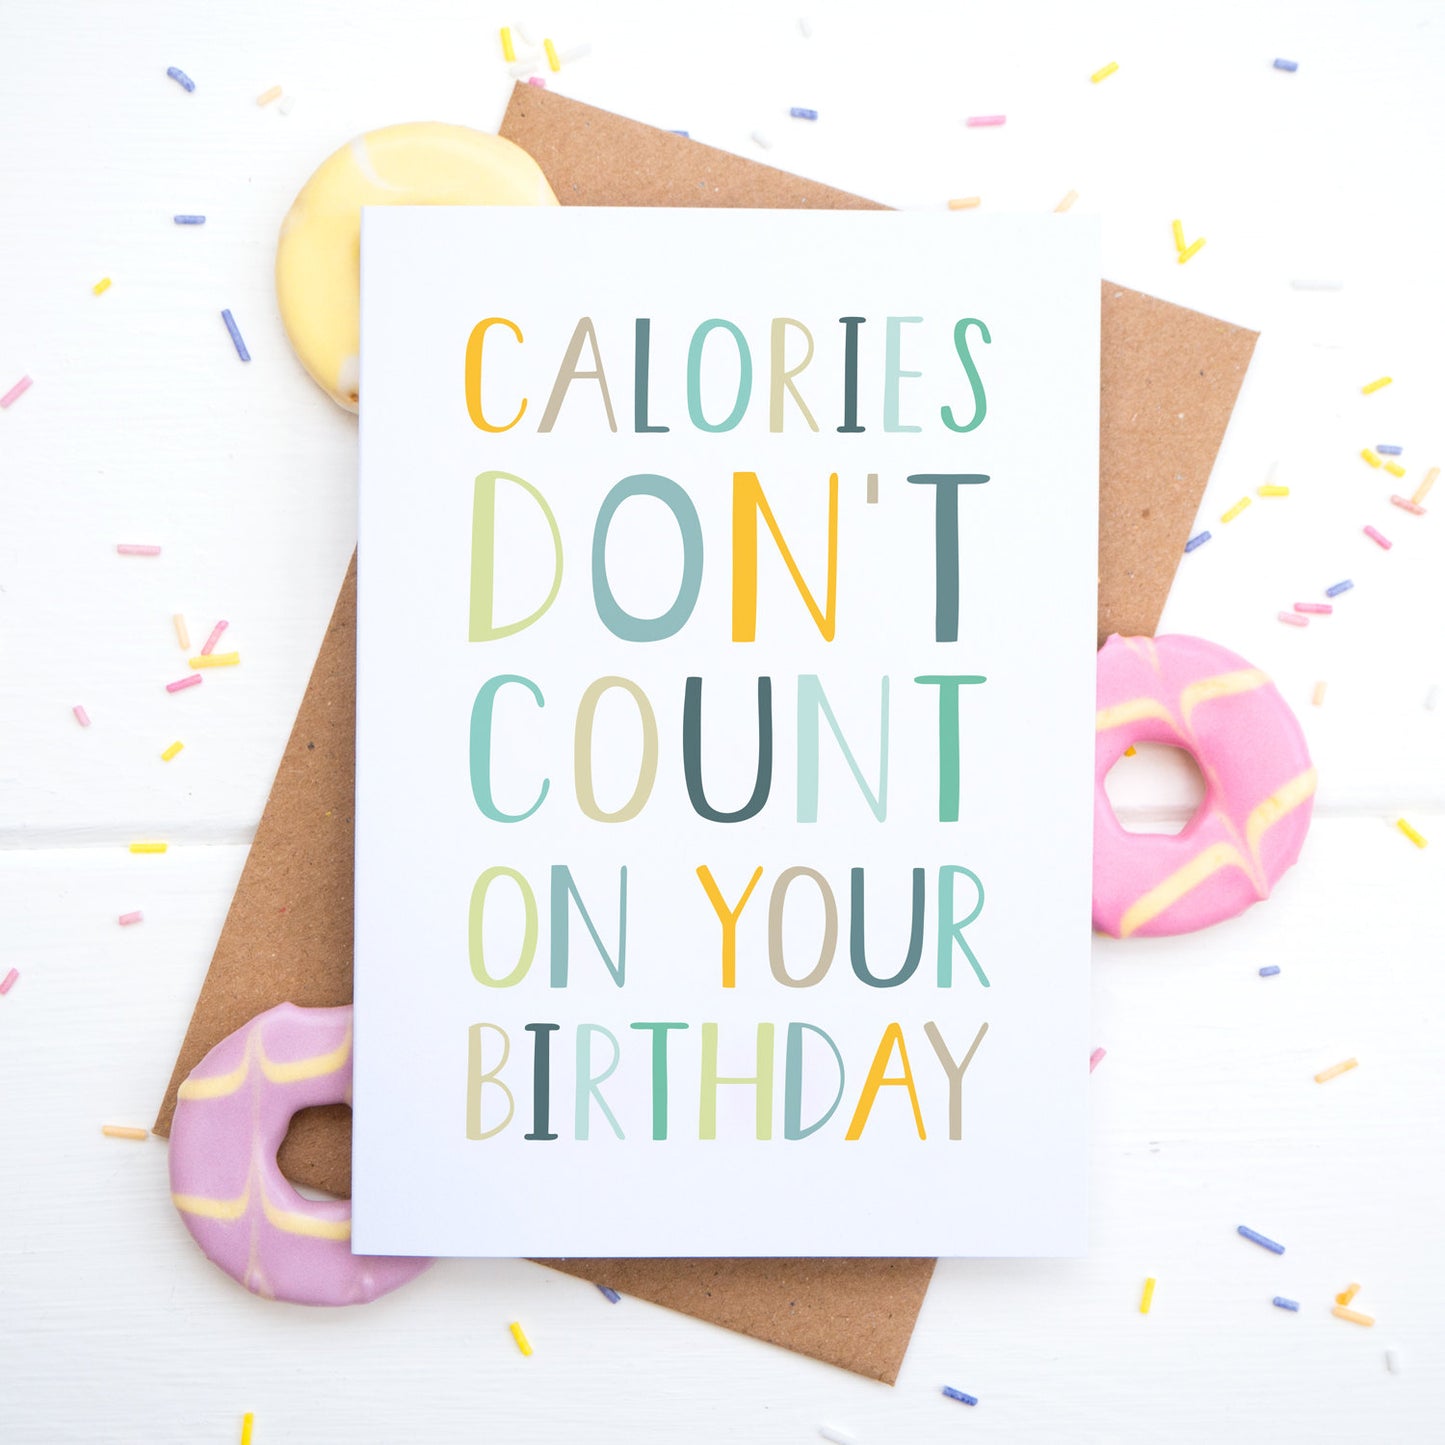 Calories don't count on your birthday in blue